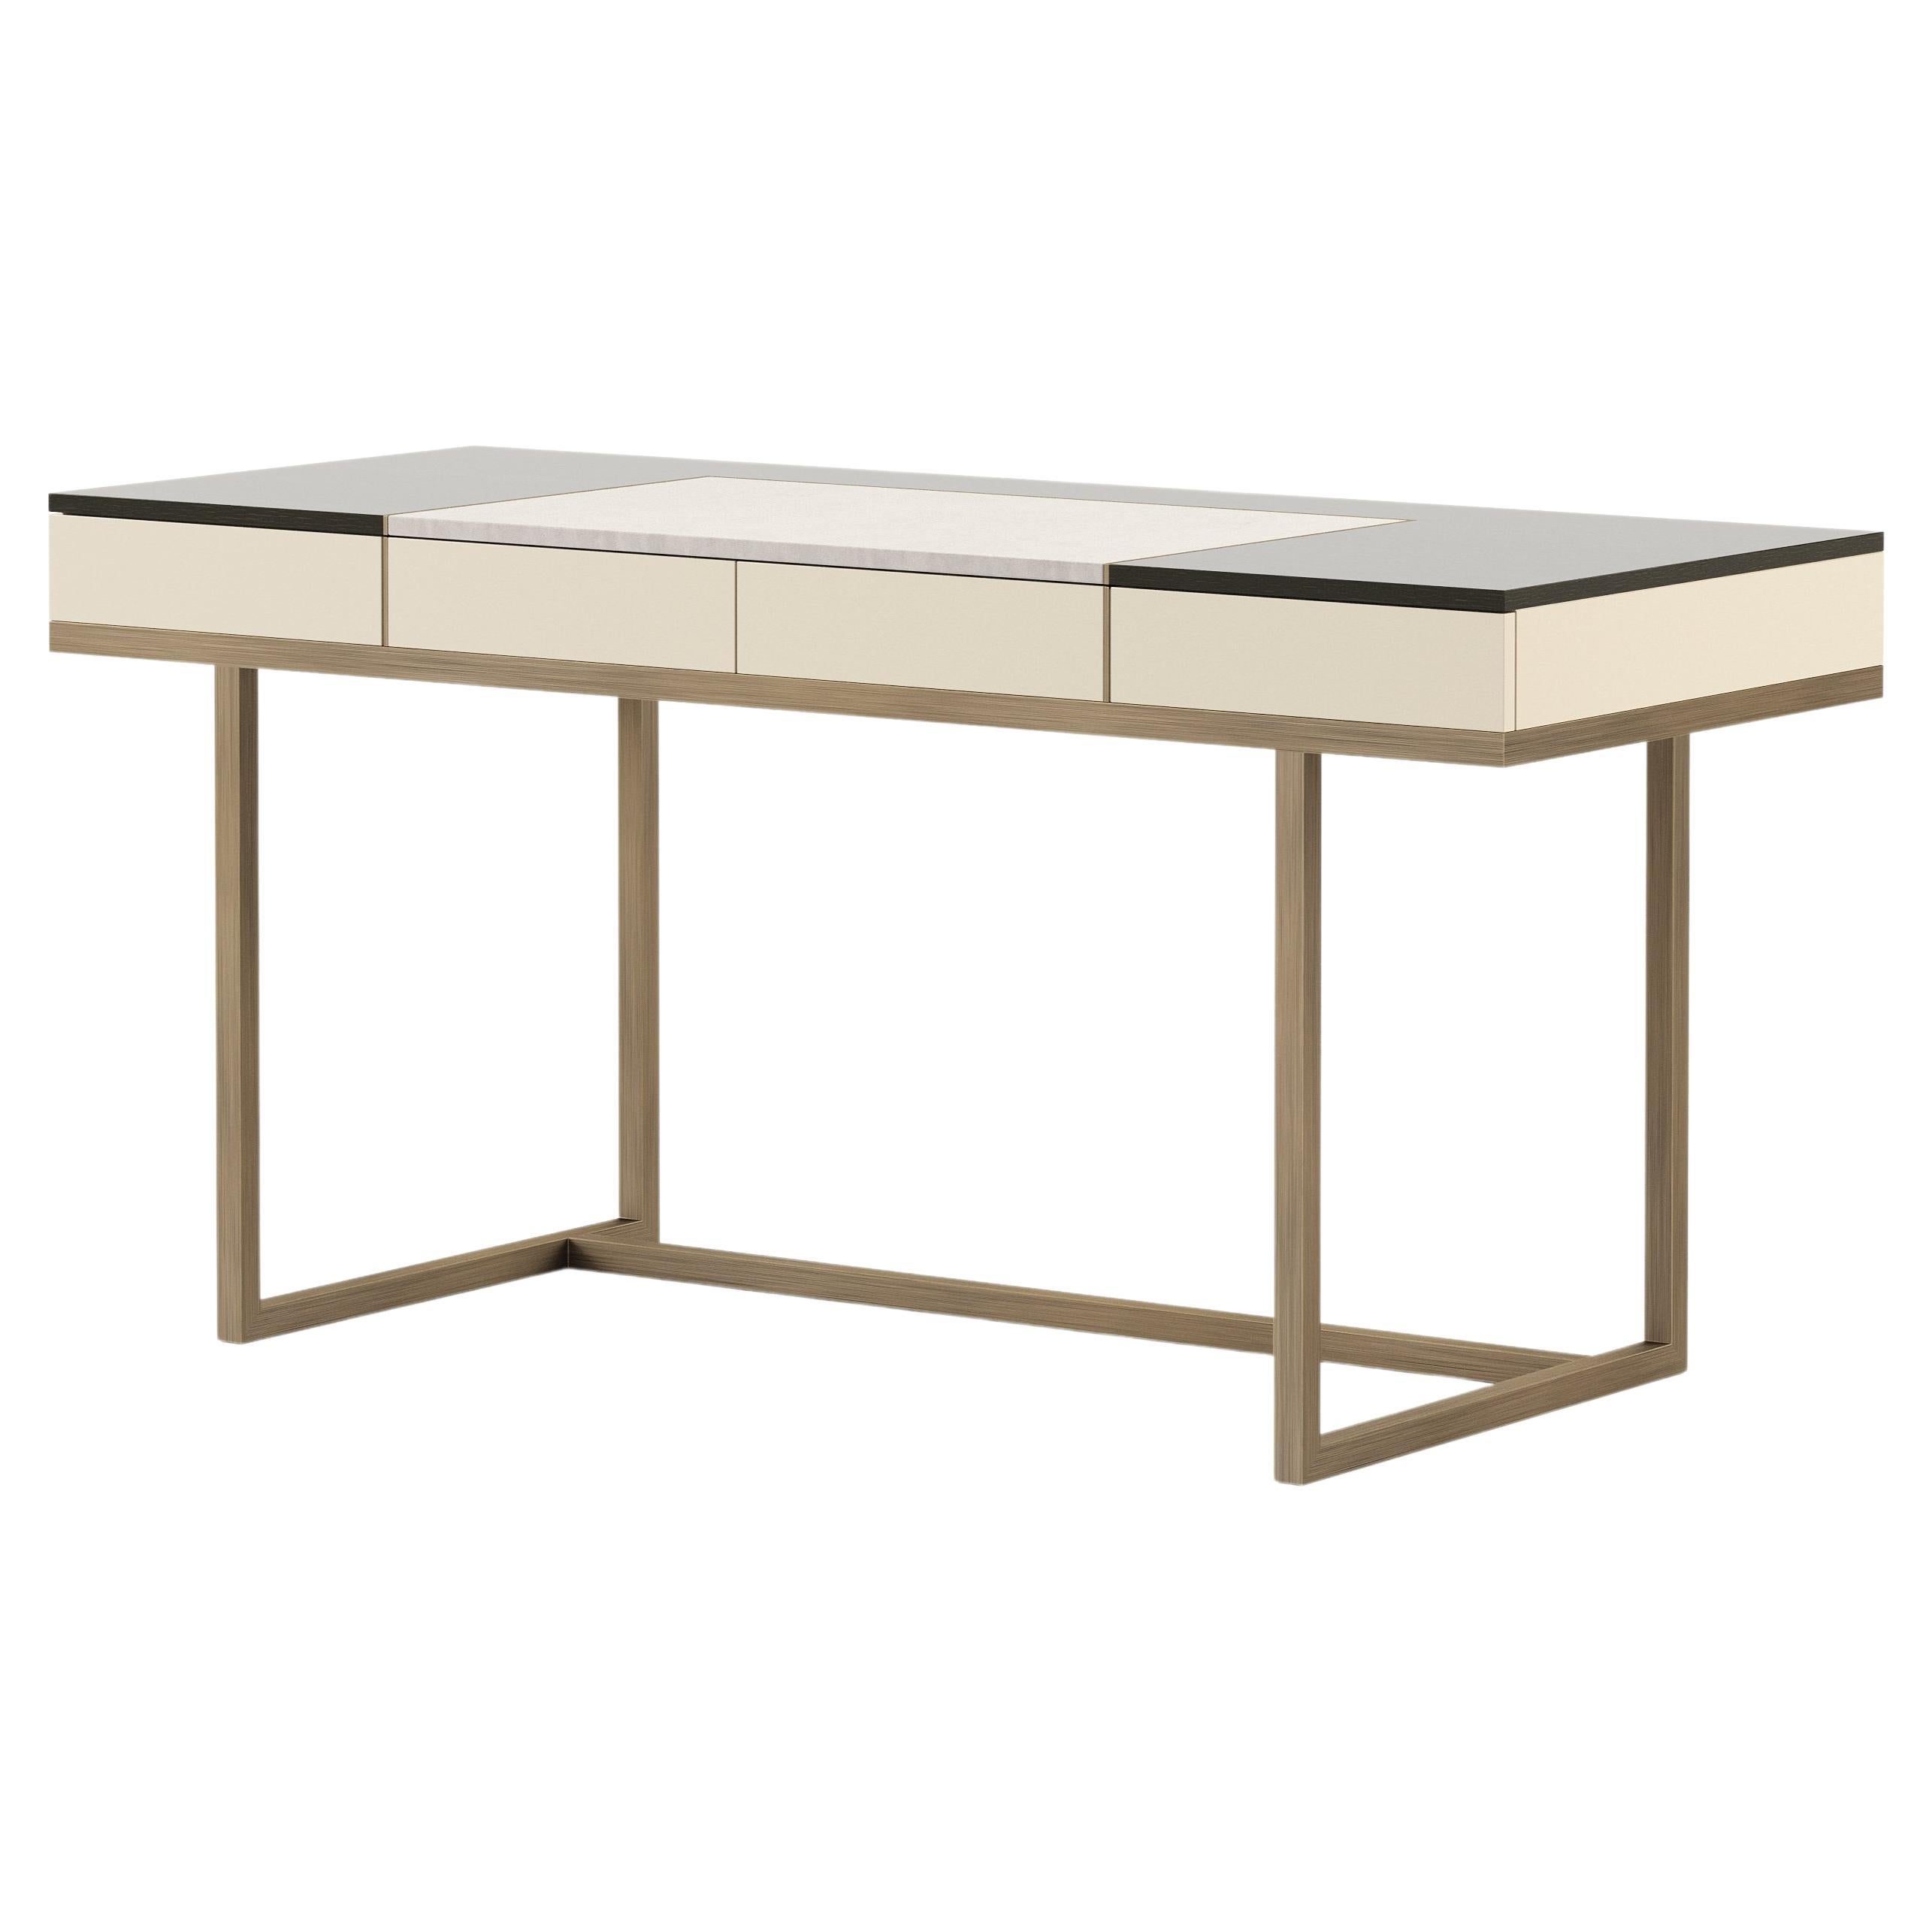 Modern Manhattan Desk Made with Oak, Lacquer and Brass, Handmade by Stylish Club For Sale